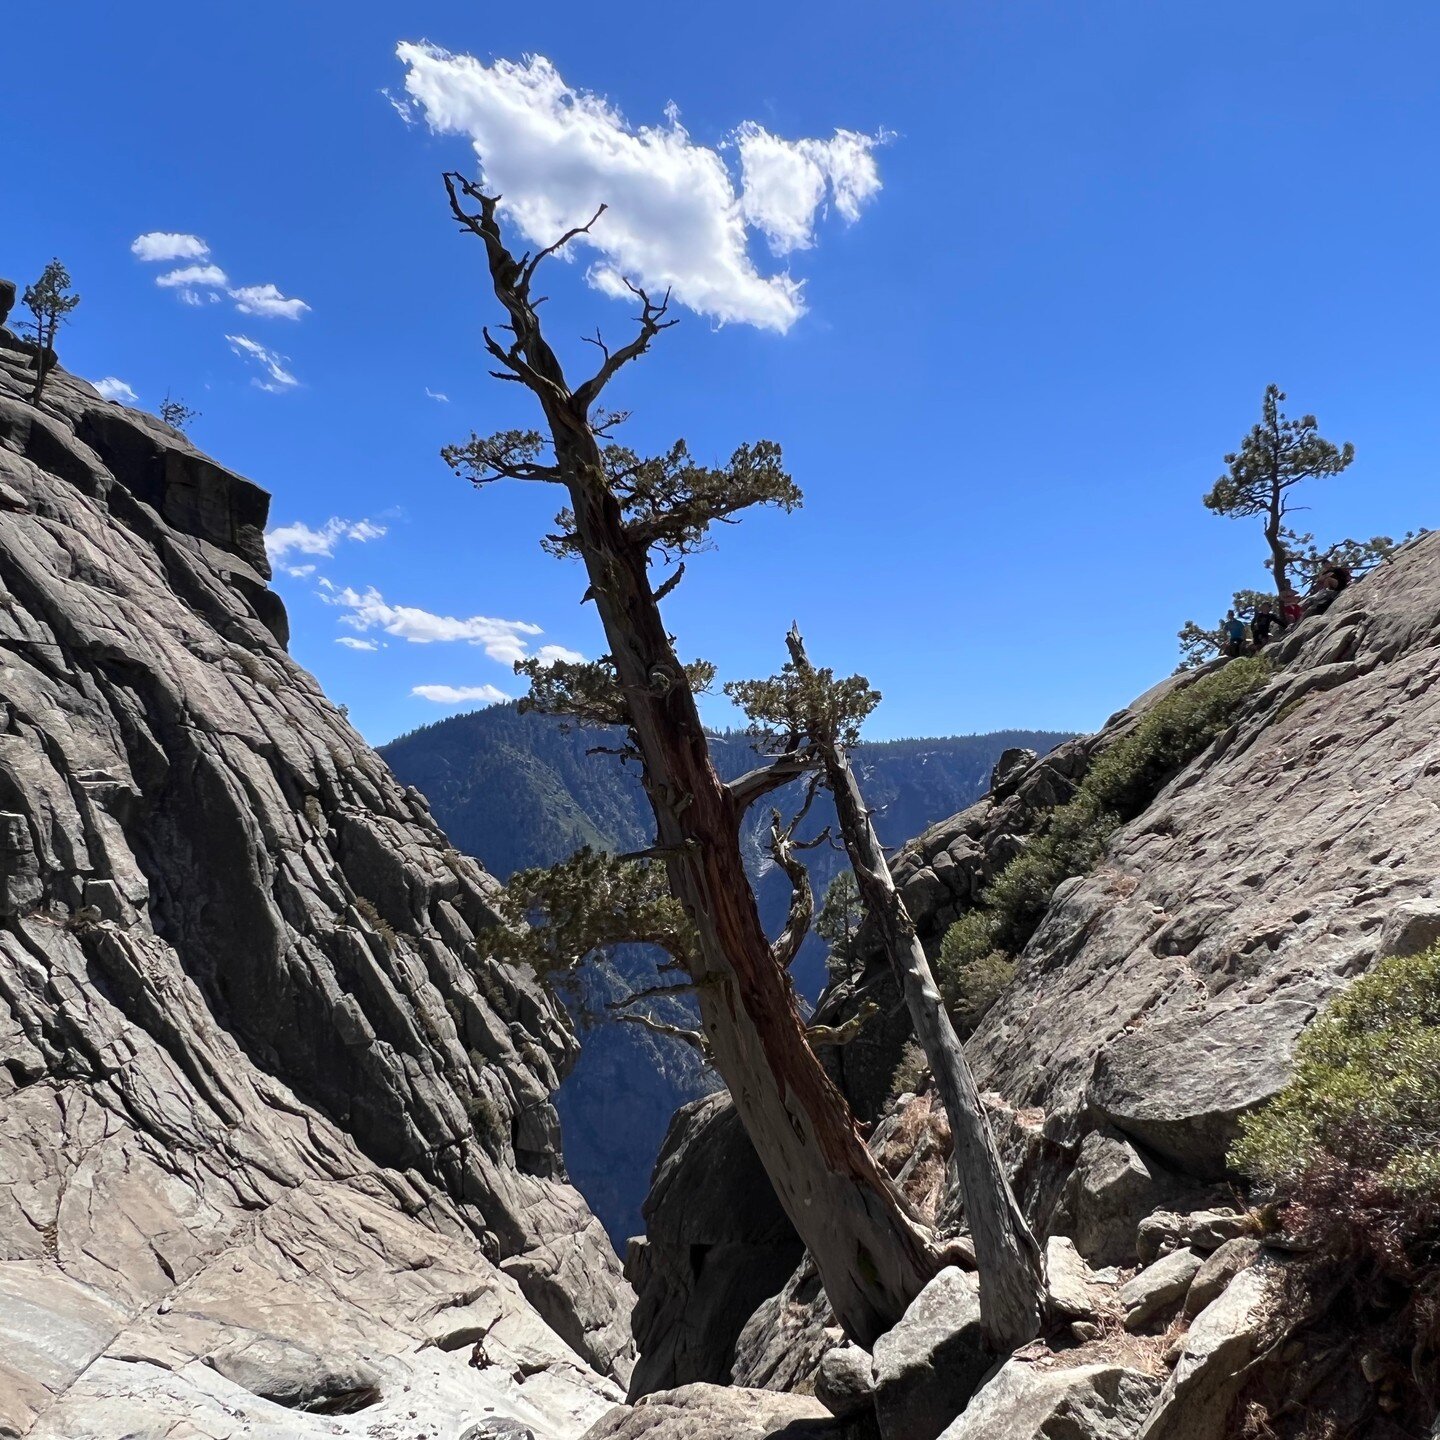 A very old tree, standing straight, but now angled in this landscape.

Also, you don't need Tunein to hear the interview. Just goggle AMFM247 and scroll down to find the show &quot;How to Live a Fantastic Life.&quot; It's there to hear anytime.